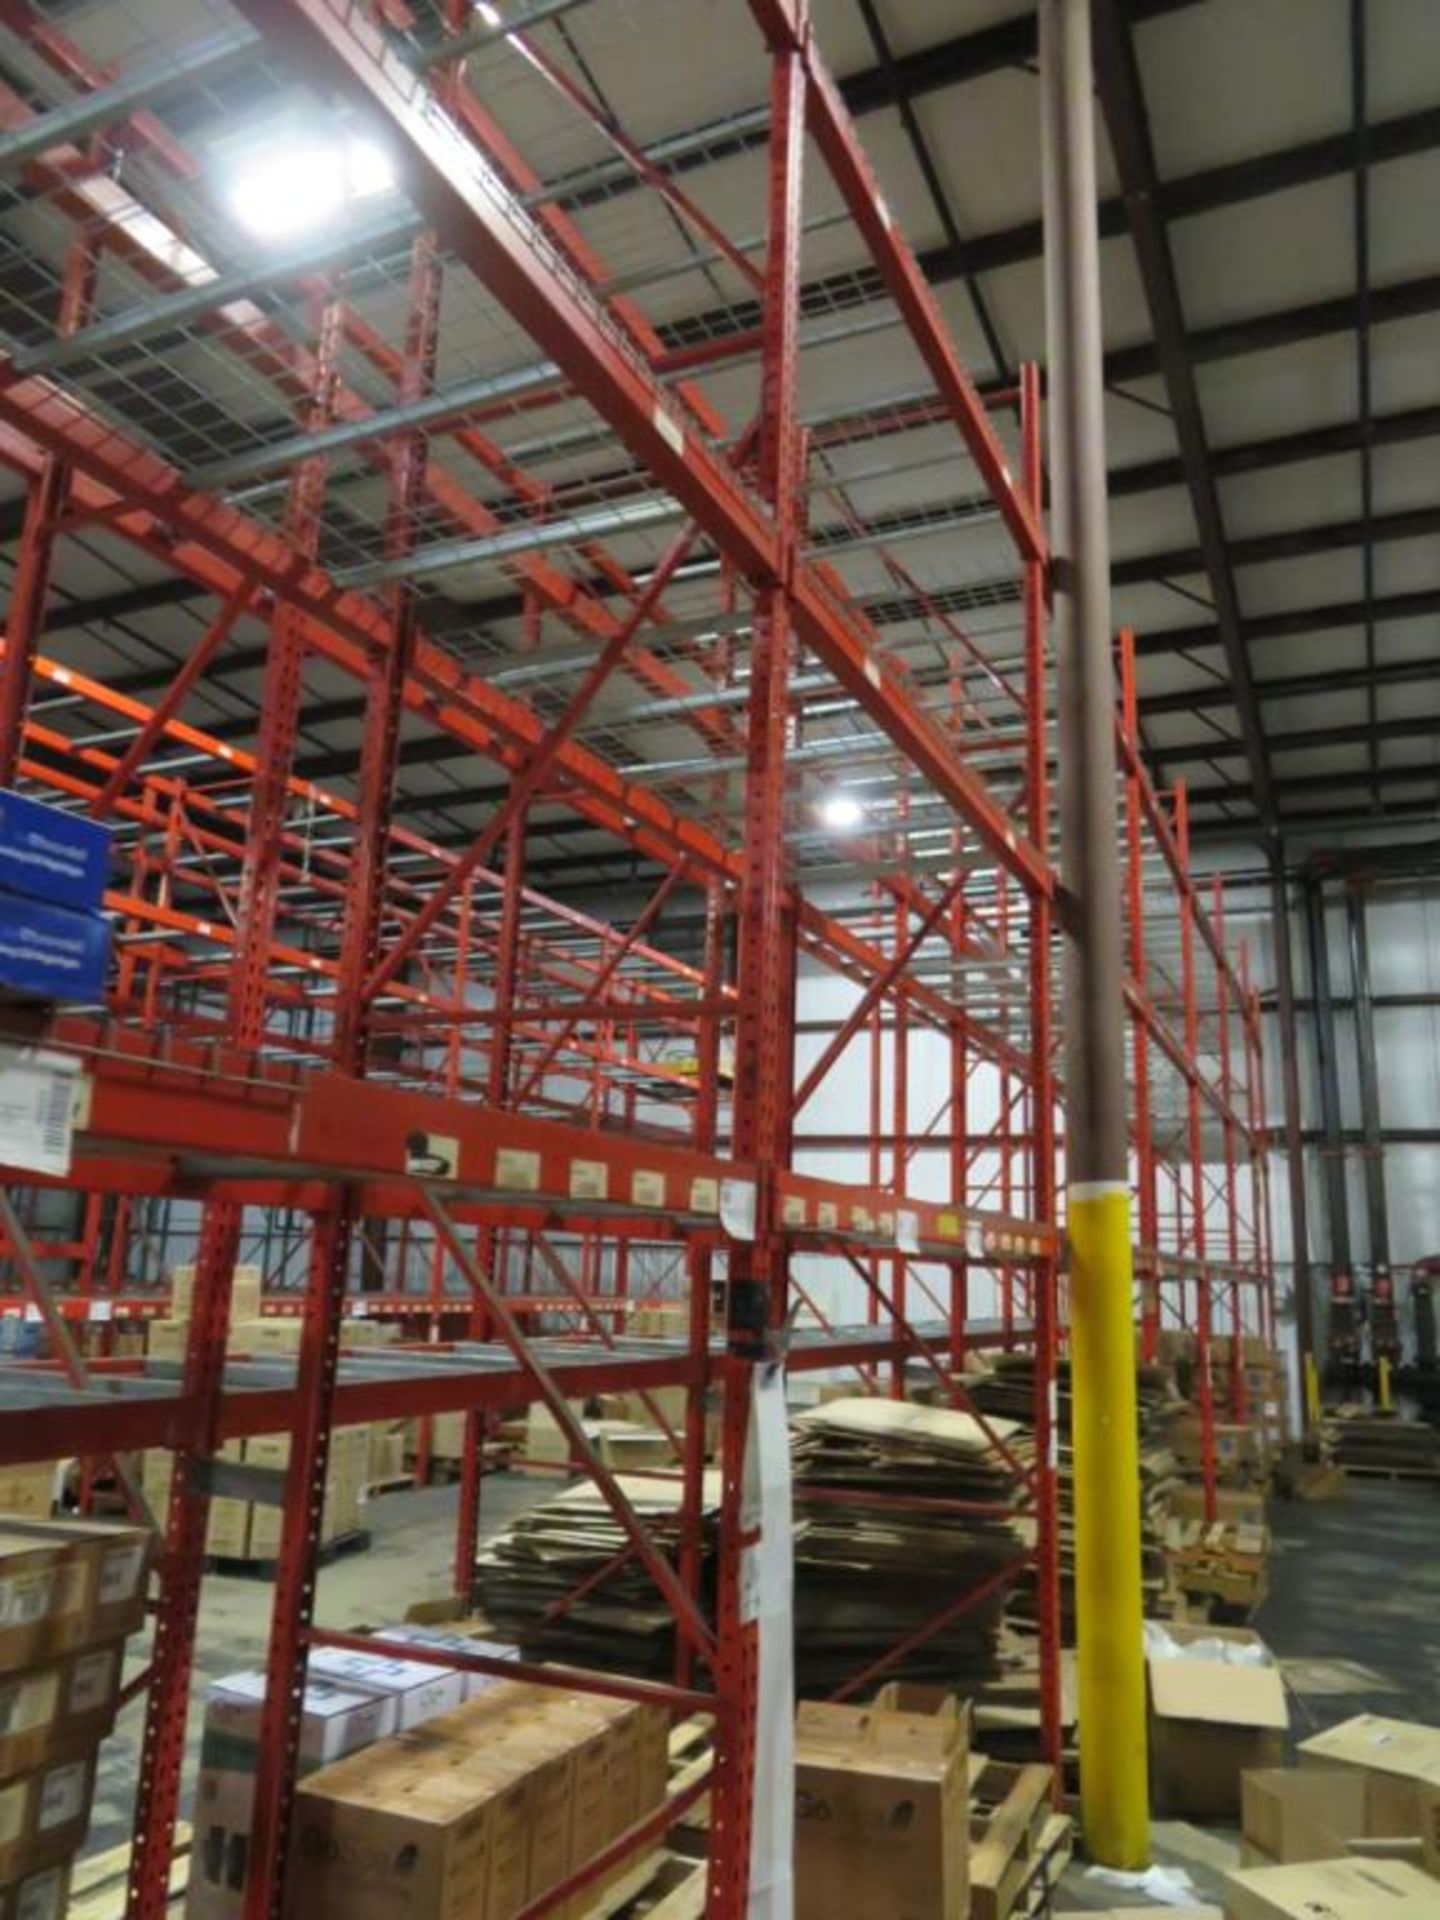 Paltier Pallet Racking 9 uprights 3"x 2 1/4", 42" wide and 18' tall, 48 beams 4 1/8" x 2 3/4" & 8' - Image 4 of 4